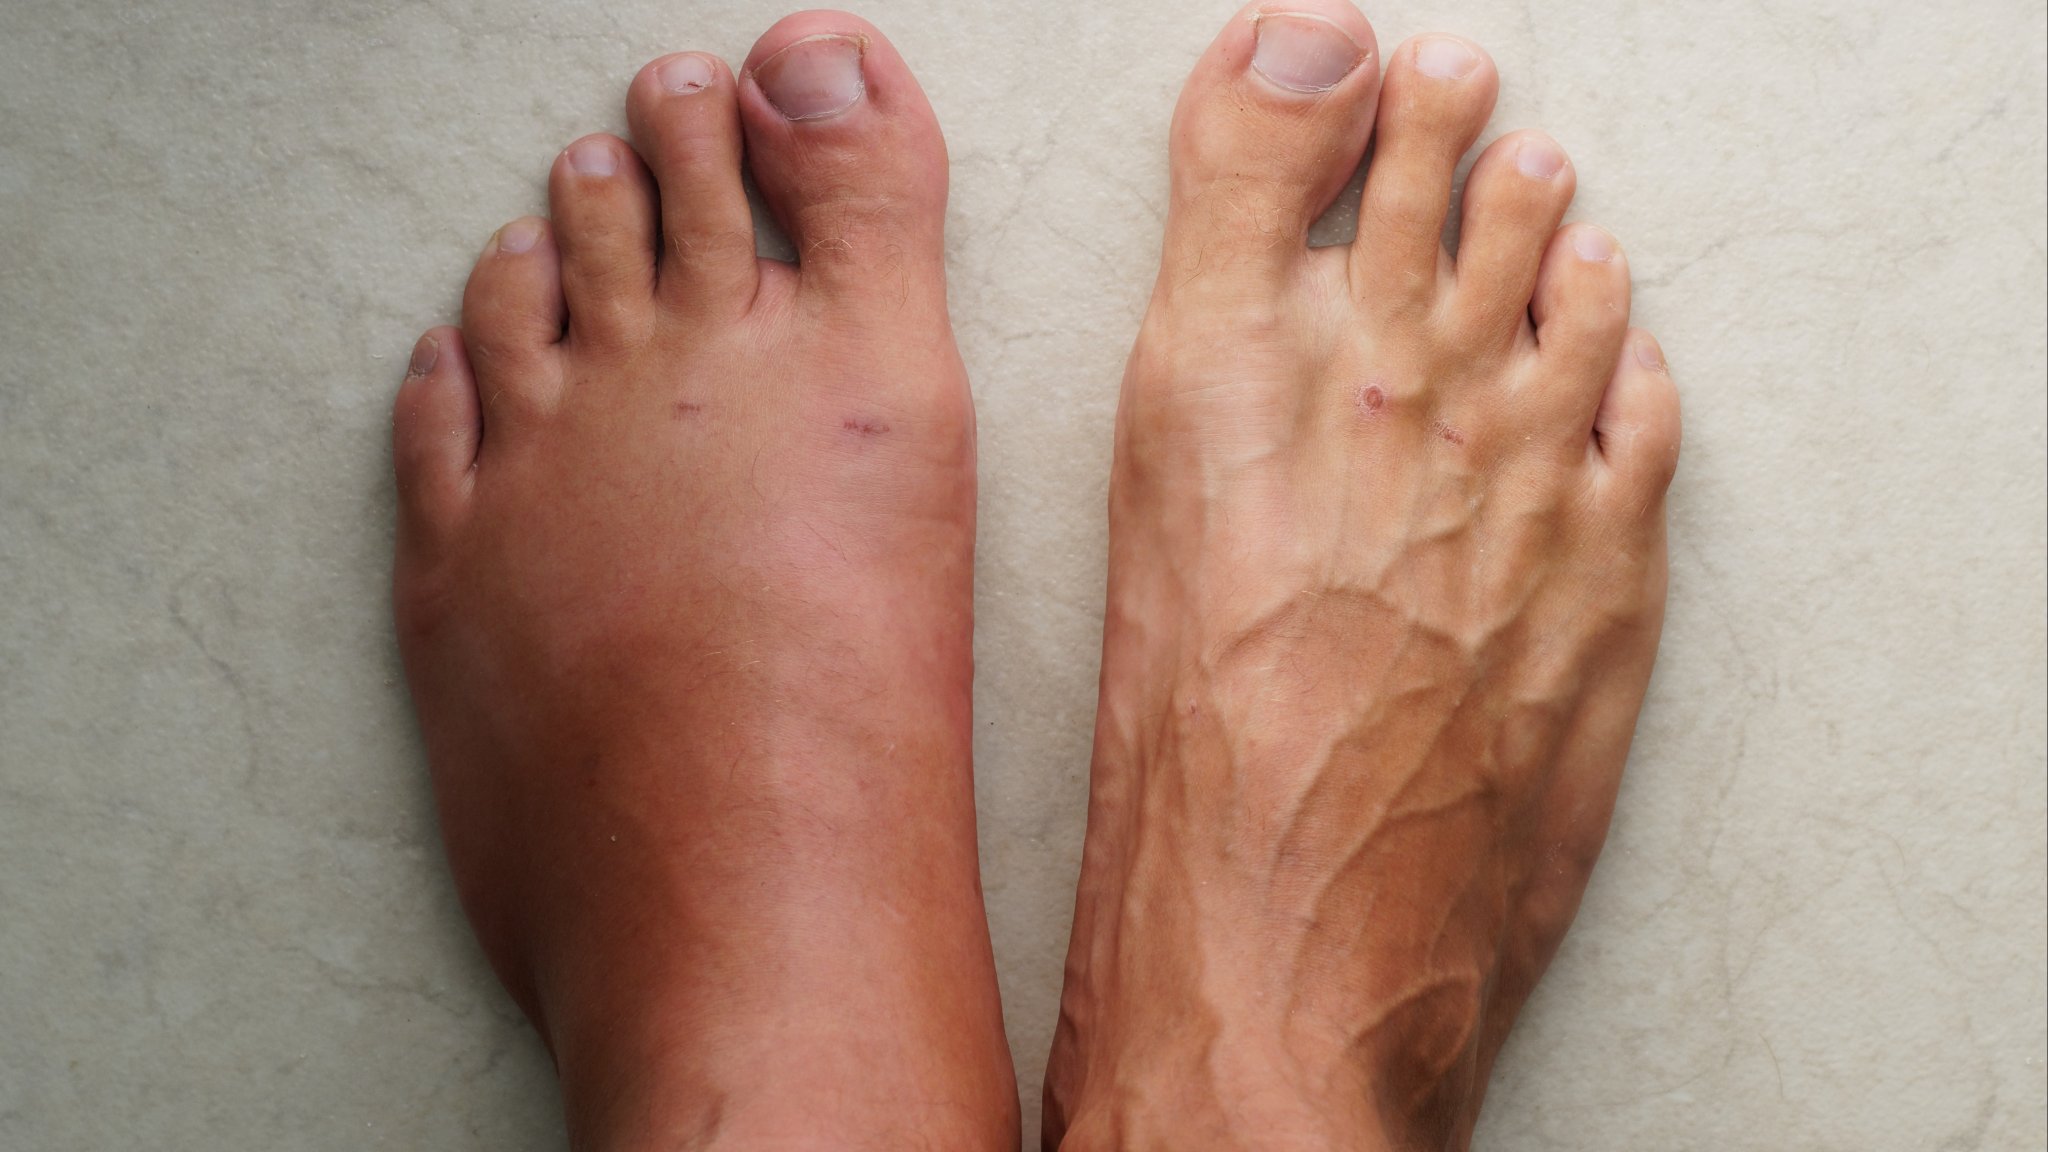 Swollen Feet: 8 Medical Conditions That Can Make Feet Puff Up